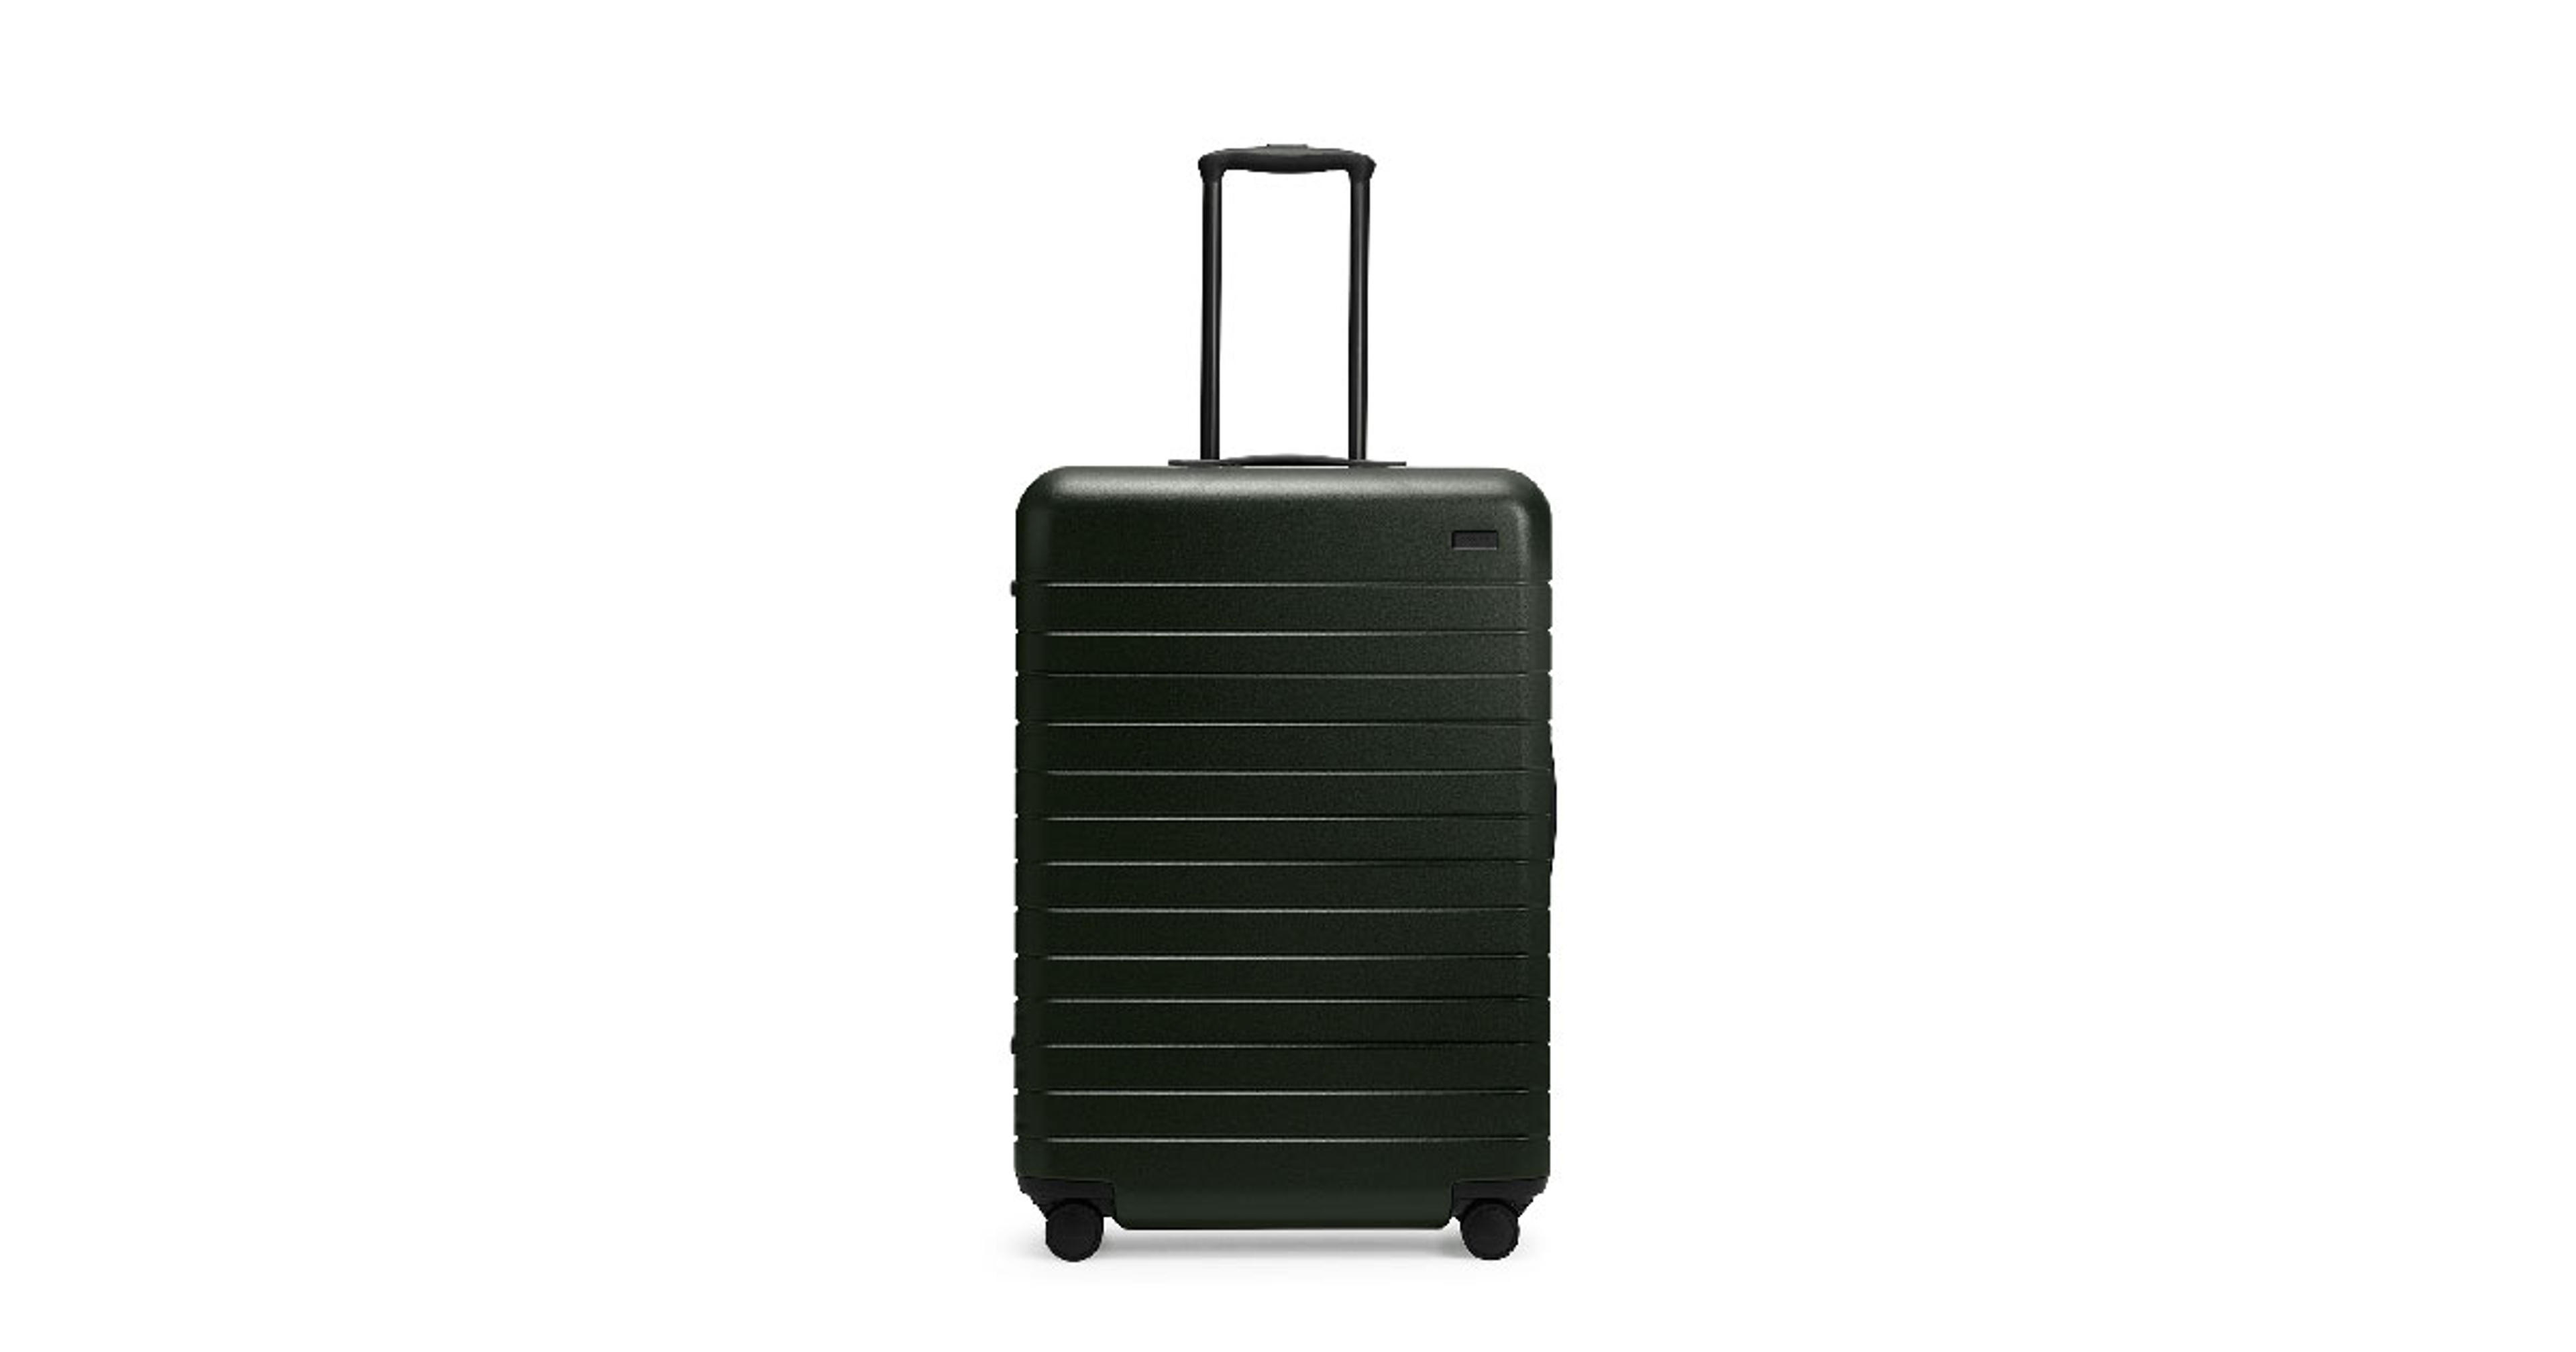 The Large suitcase | Away: Built for modern travel